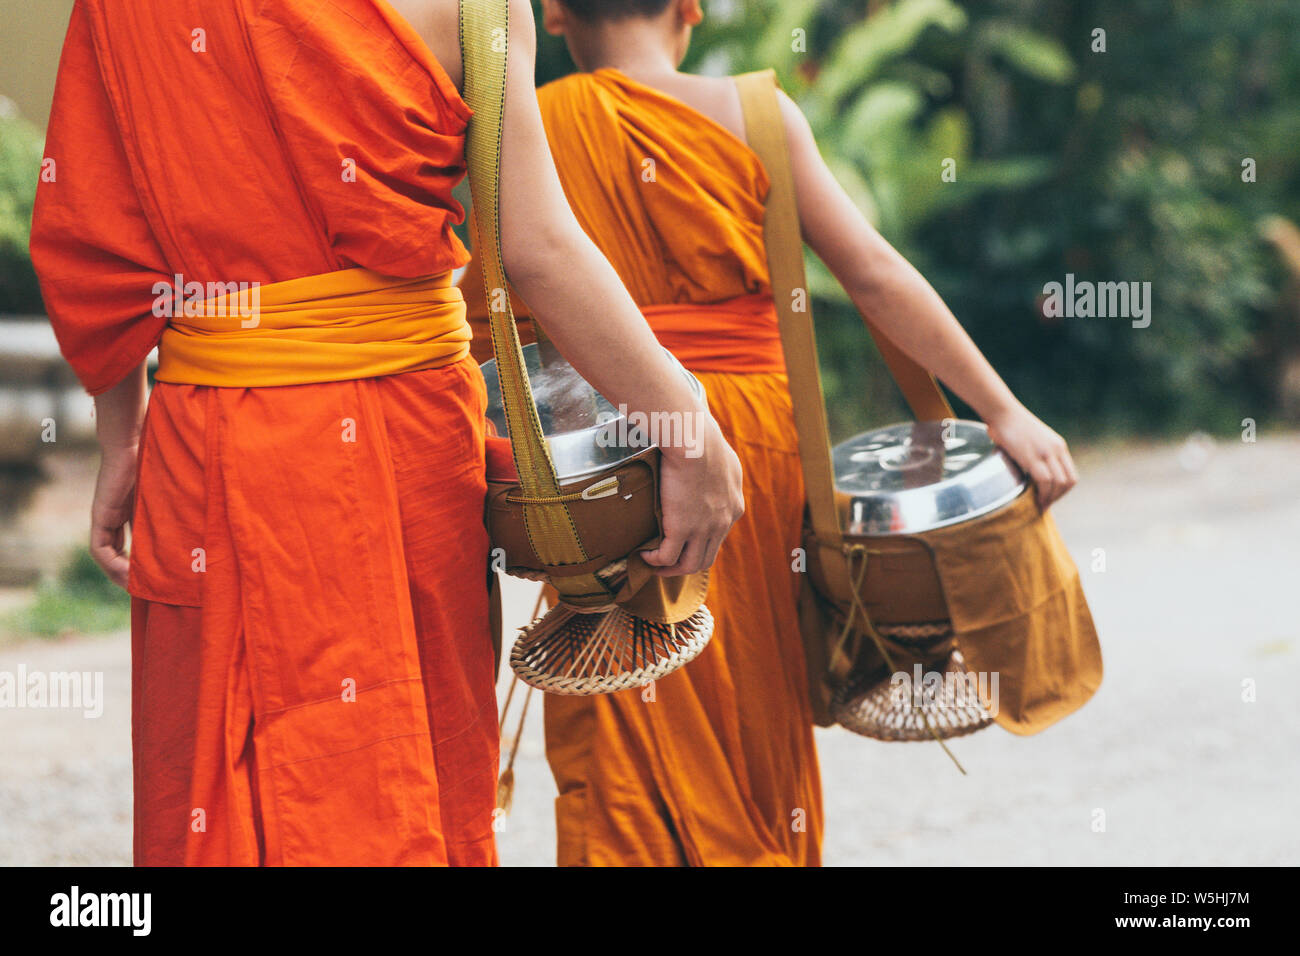 Buddhist monks during Laotian traditional sacred alms giving ceremony in Luang Prabang city, Laos. Stock Photo